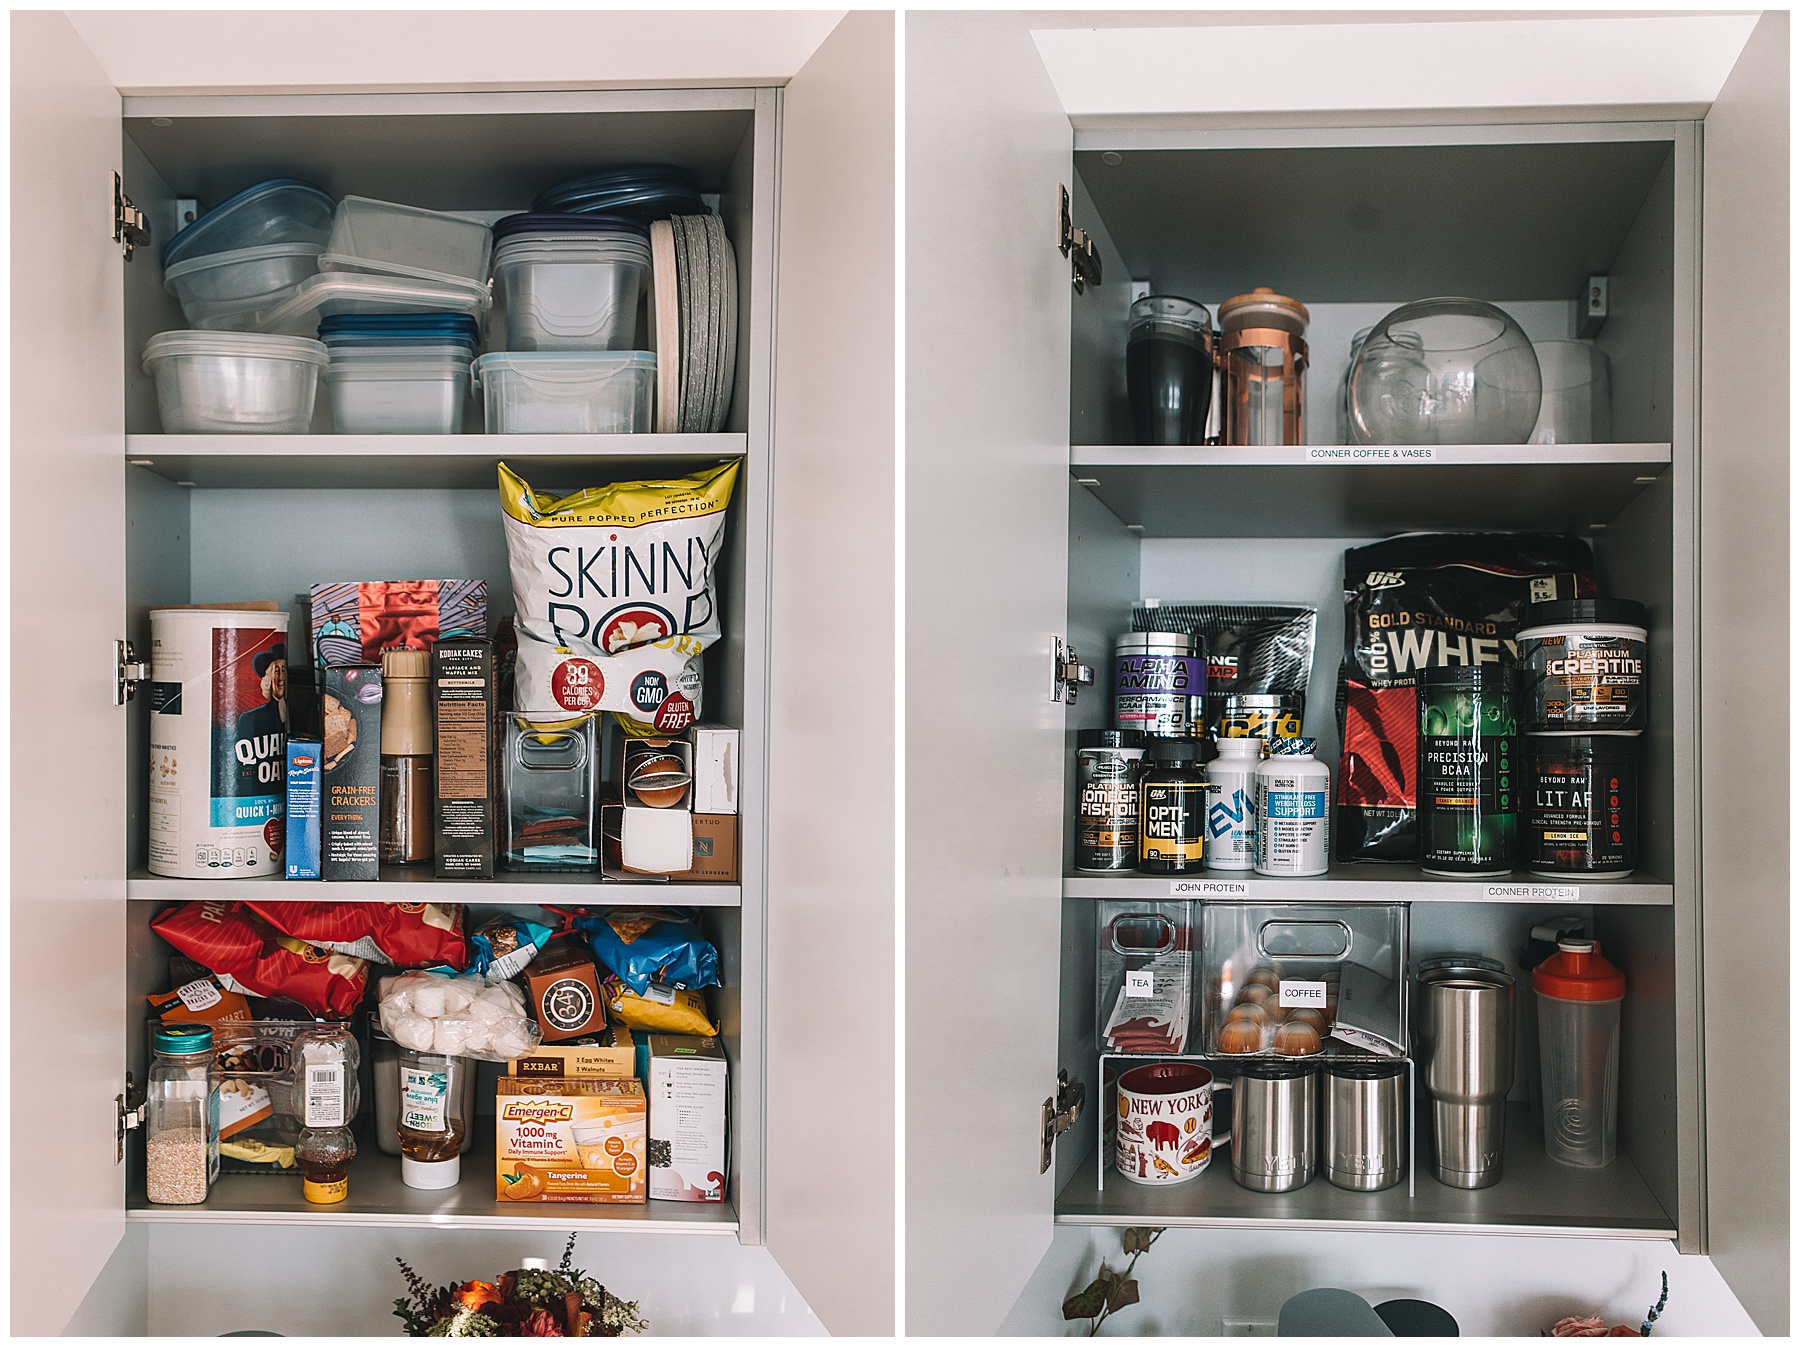 How to Organize Your Home Pantry - The New York Times